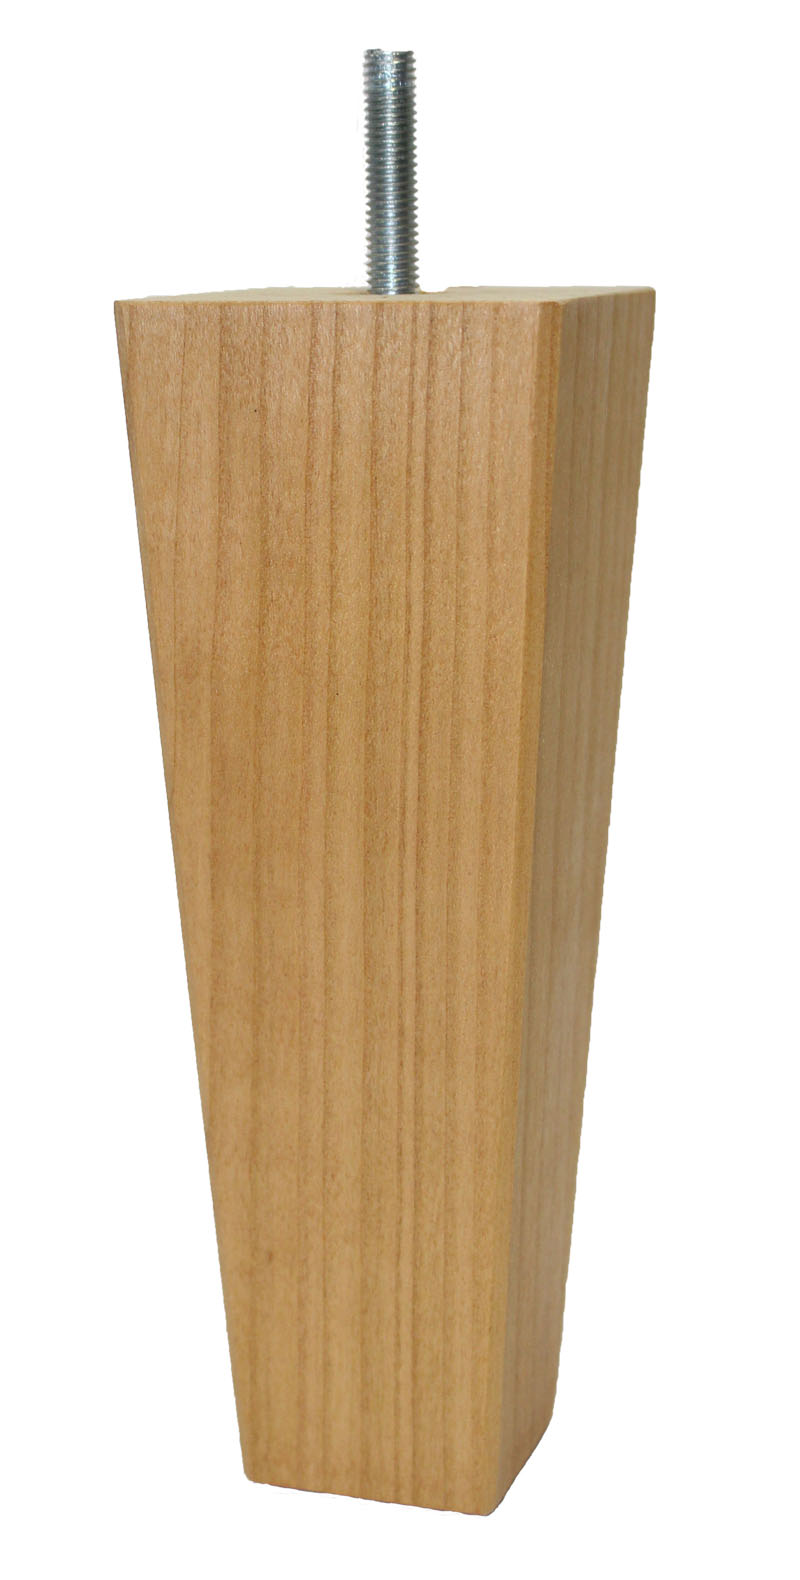 Gabrielle Solid Cherry Wooden Furniture Legs - Natural Oiled Finish - Set of 4